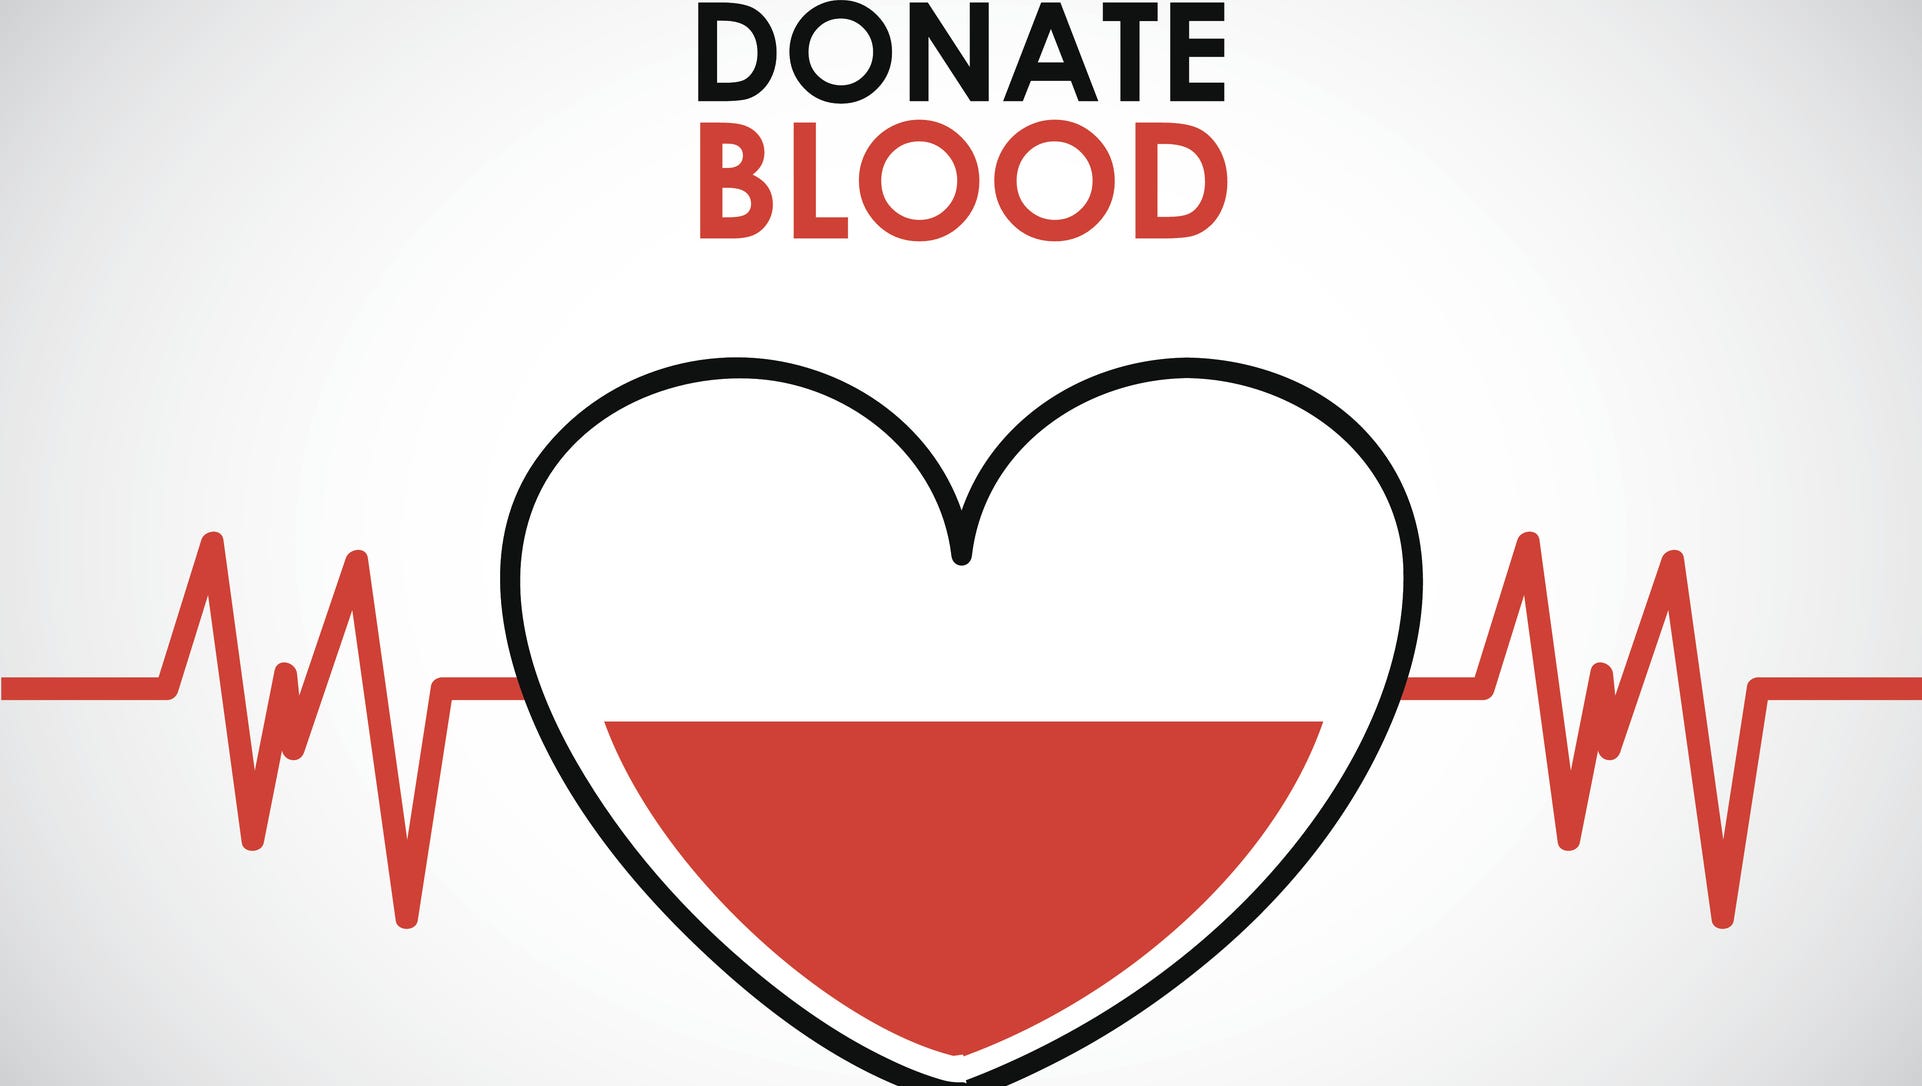 red cross blood donation requirements height weight